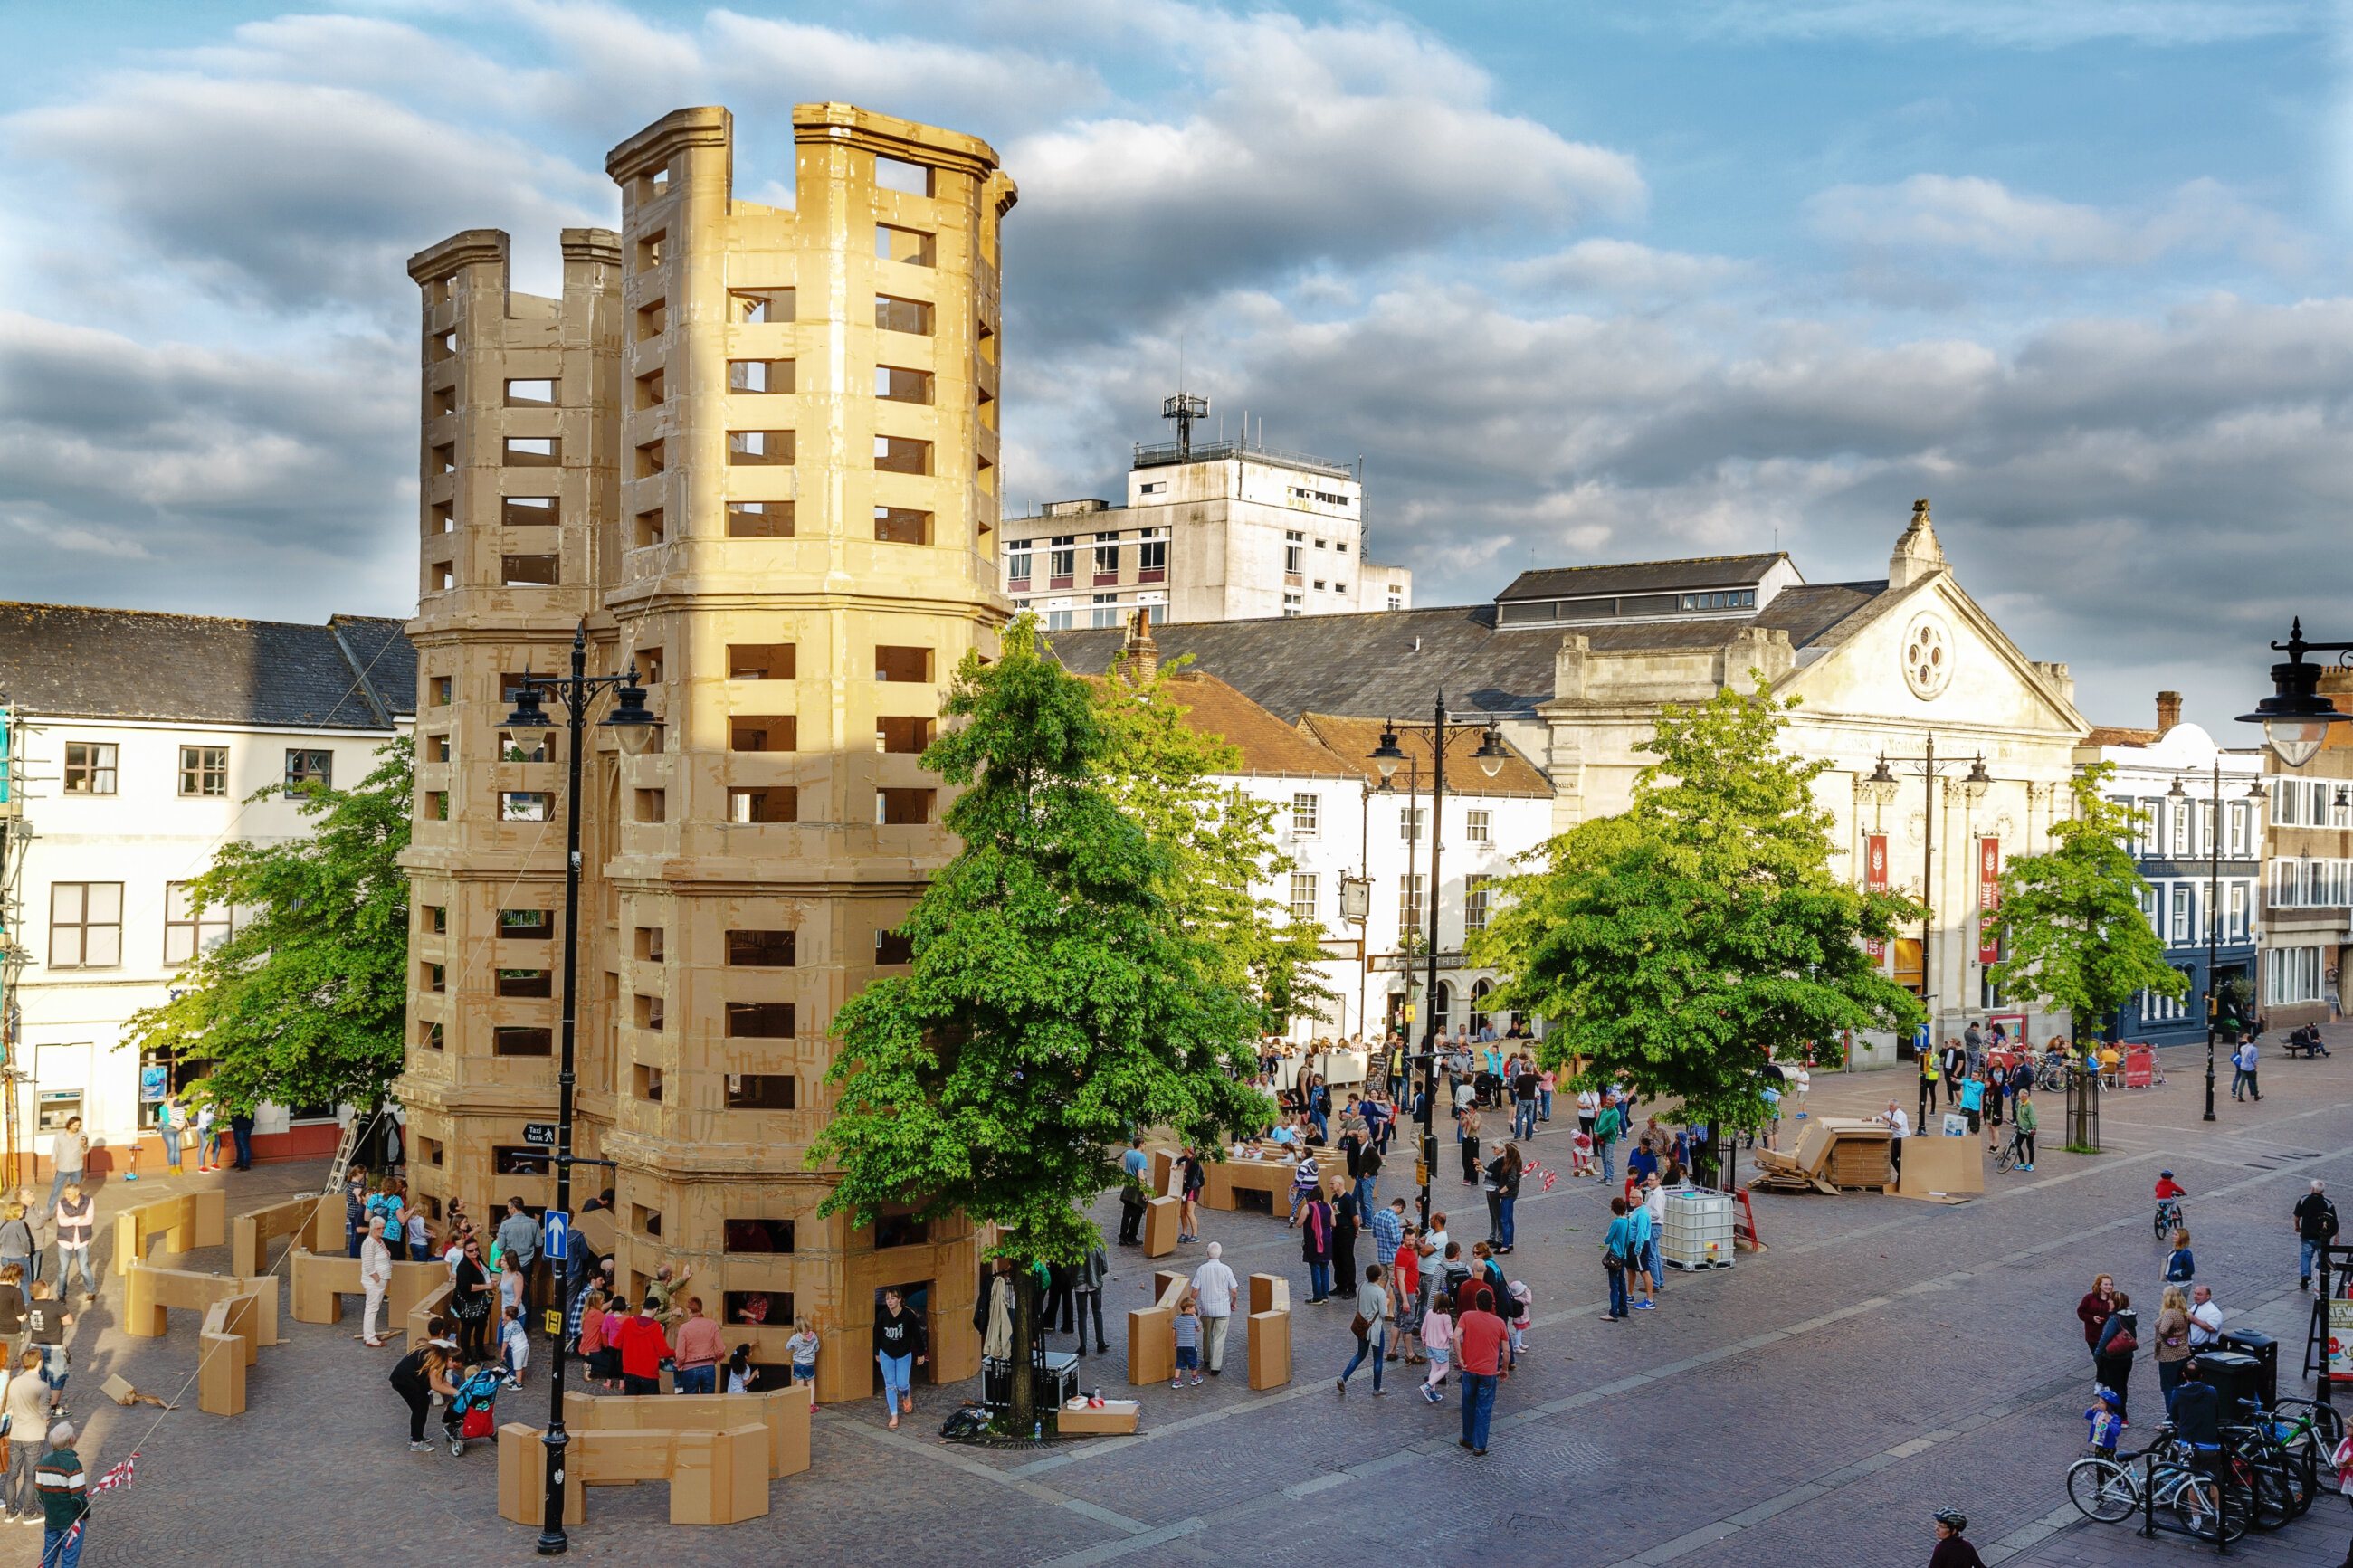 Image is of a large cardboard building in Newbury market place. The cardboard building is larger than all the other real buildings that surround it. Public audiences gather is small groups to admire the vast size of the 'building' structure constructed out of cardboard boxes.